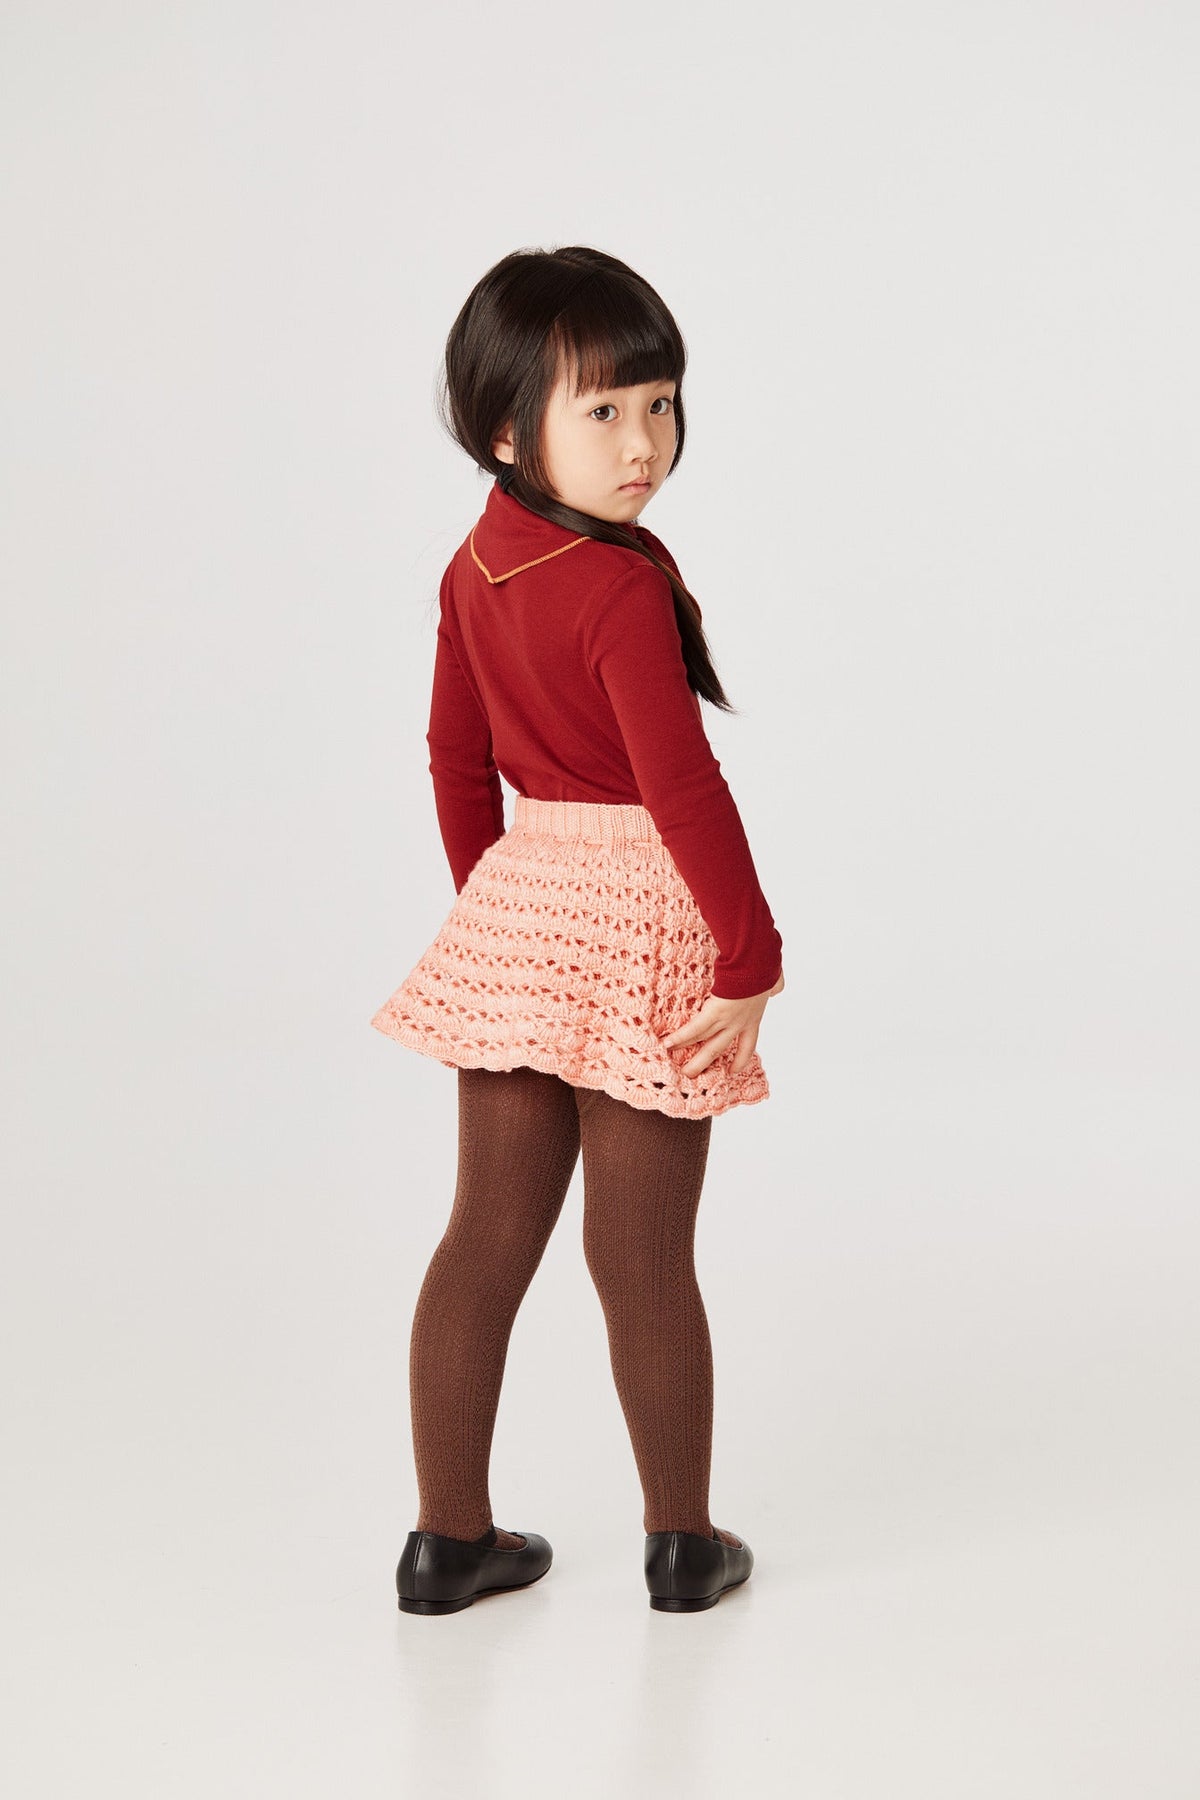 Scout Top - Cranberry+Model is 41 inches tall, 38lbs, wearing a size 4-5y